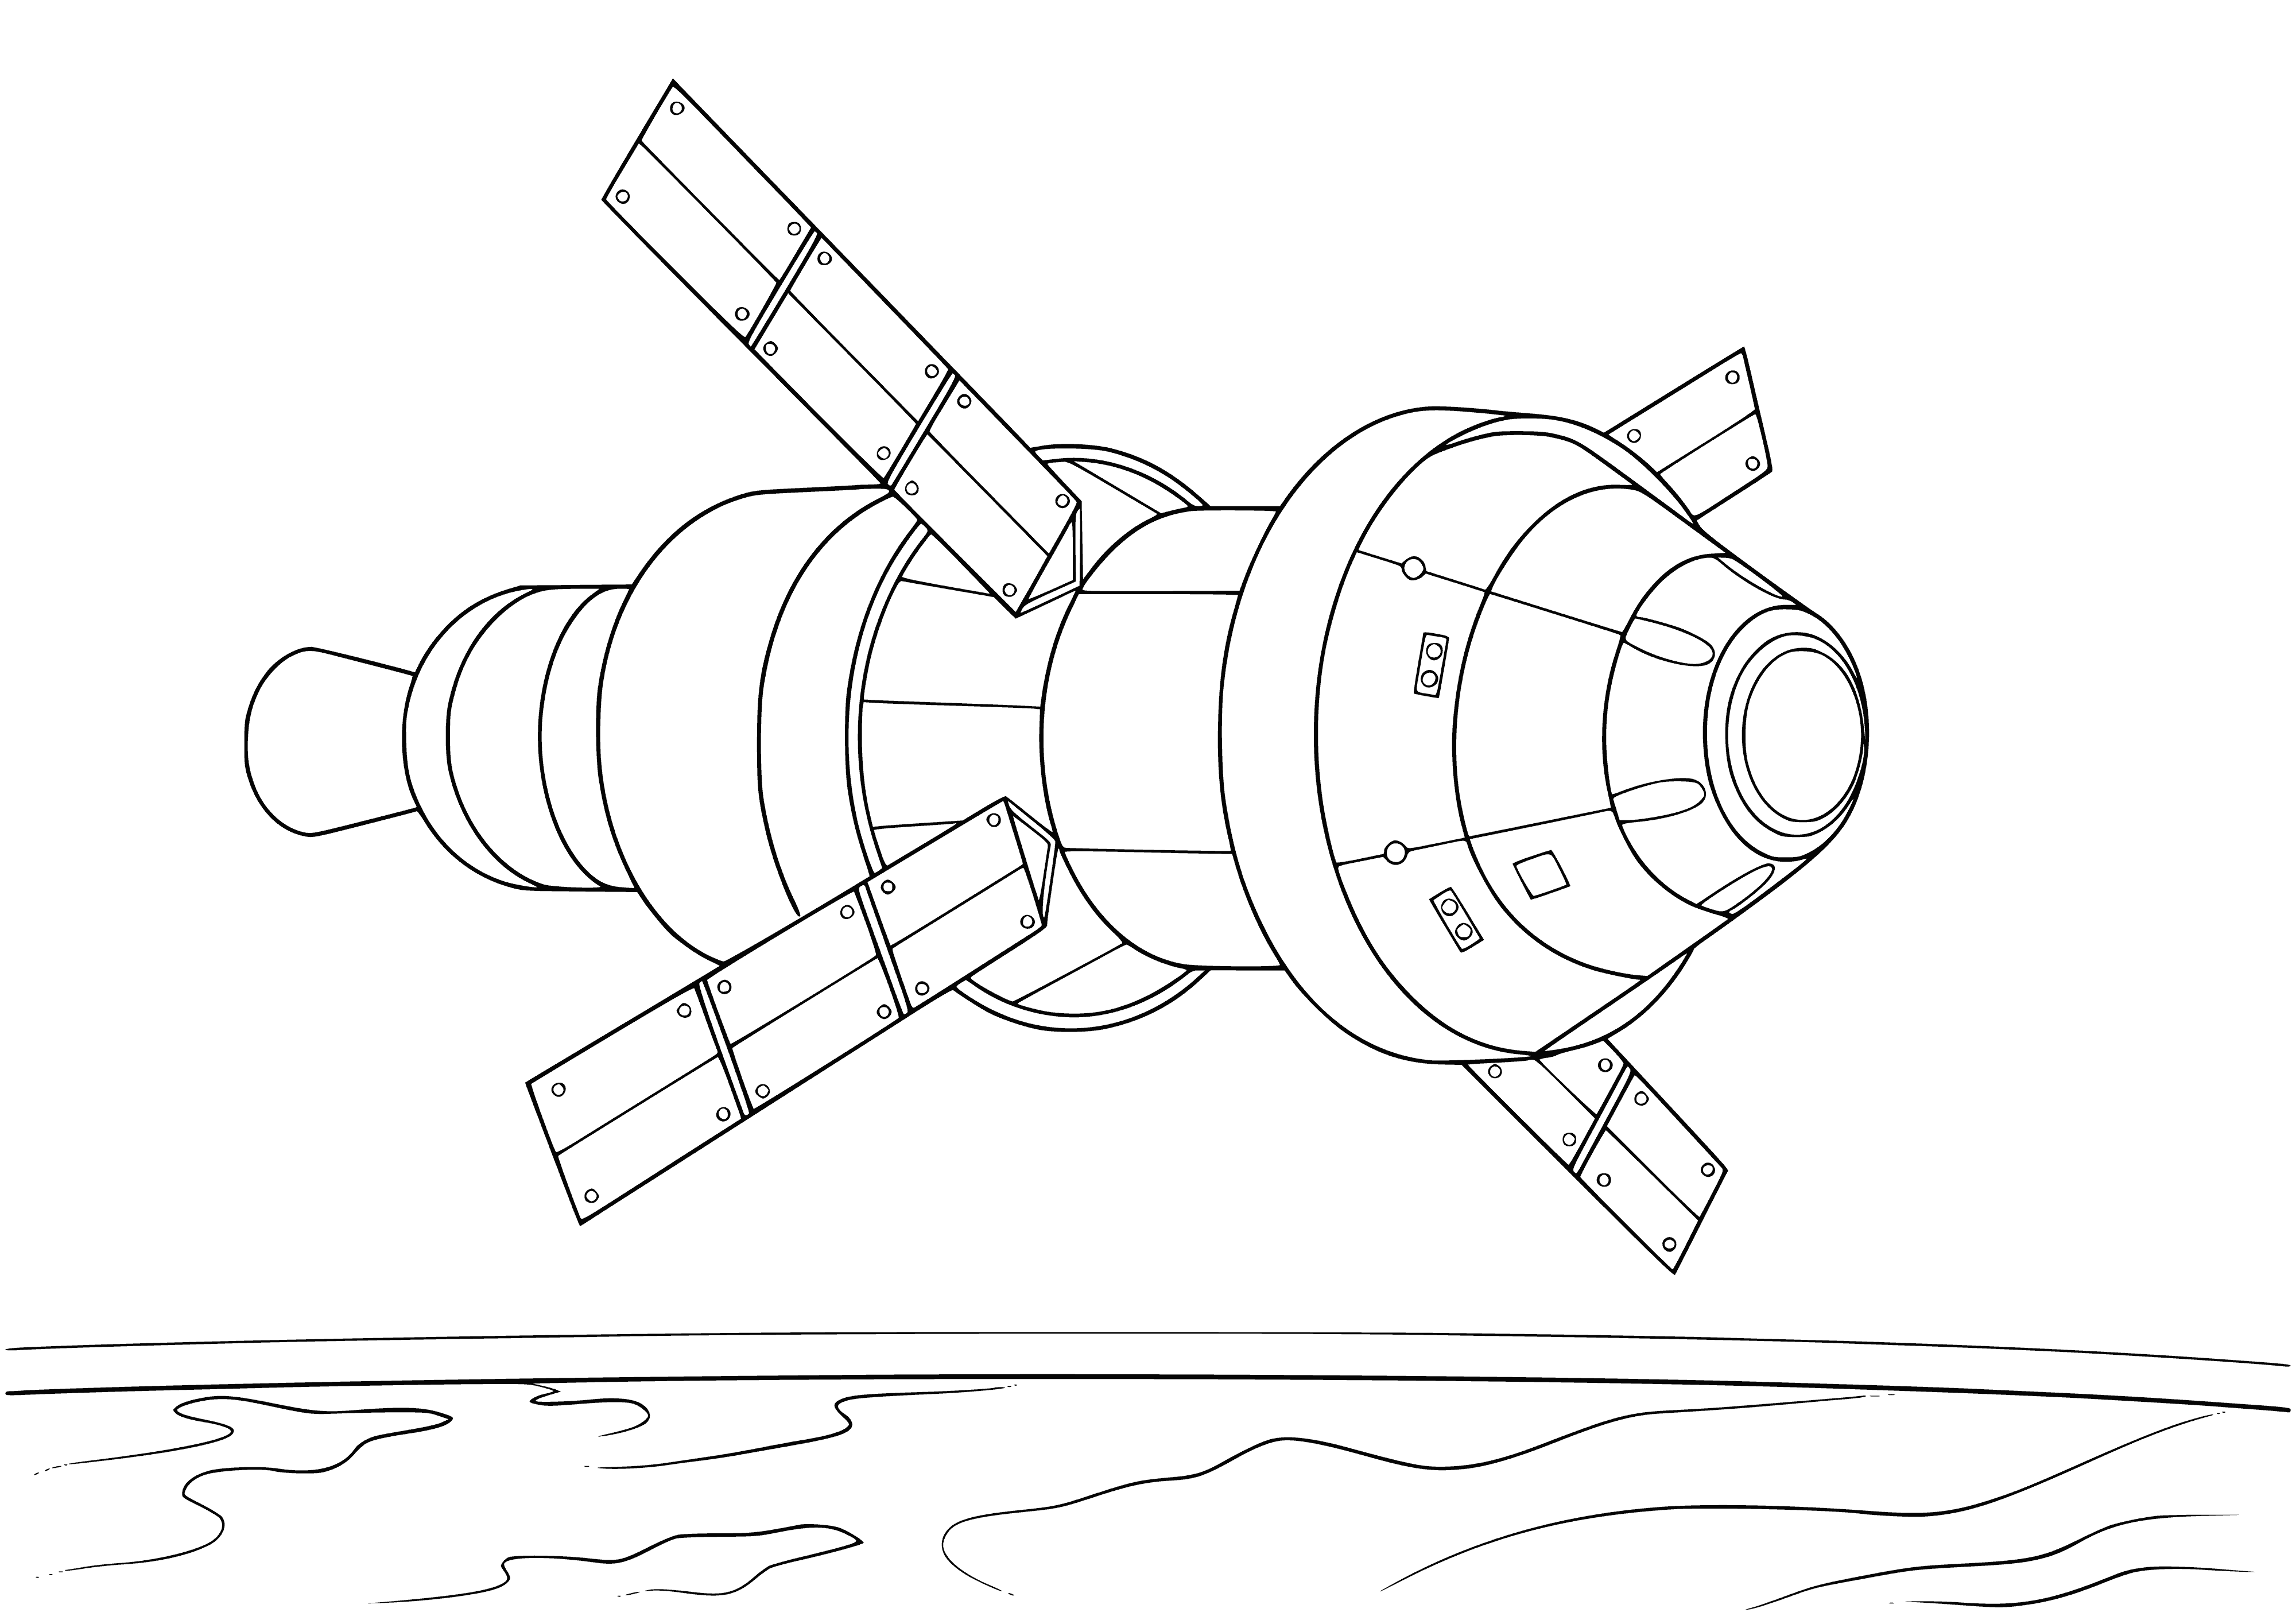 coloring page: Large silver satellite seen in space, slowly spinning & orbiting planet, with dish-shaped antenna attached to side. #space #satellite